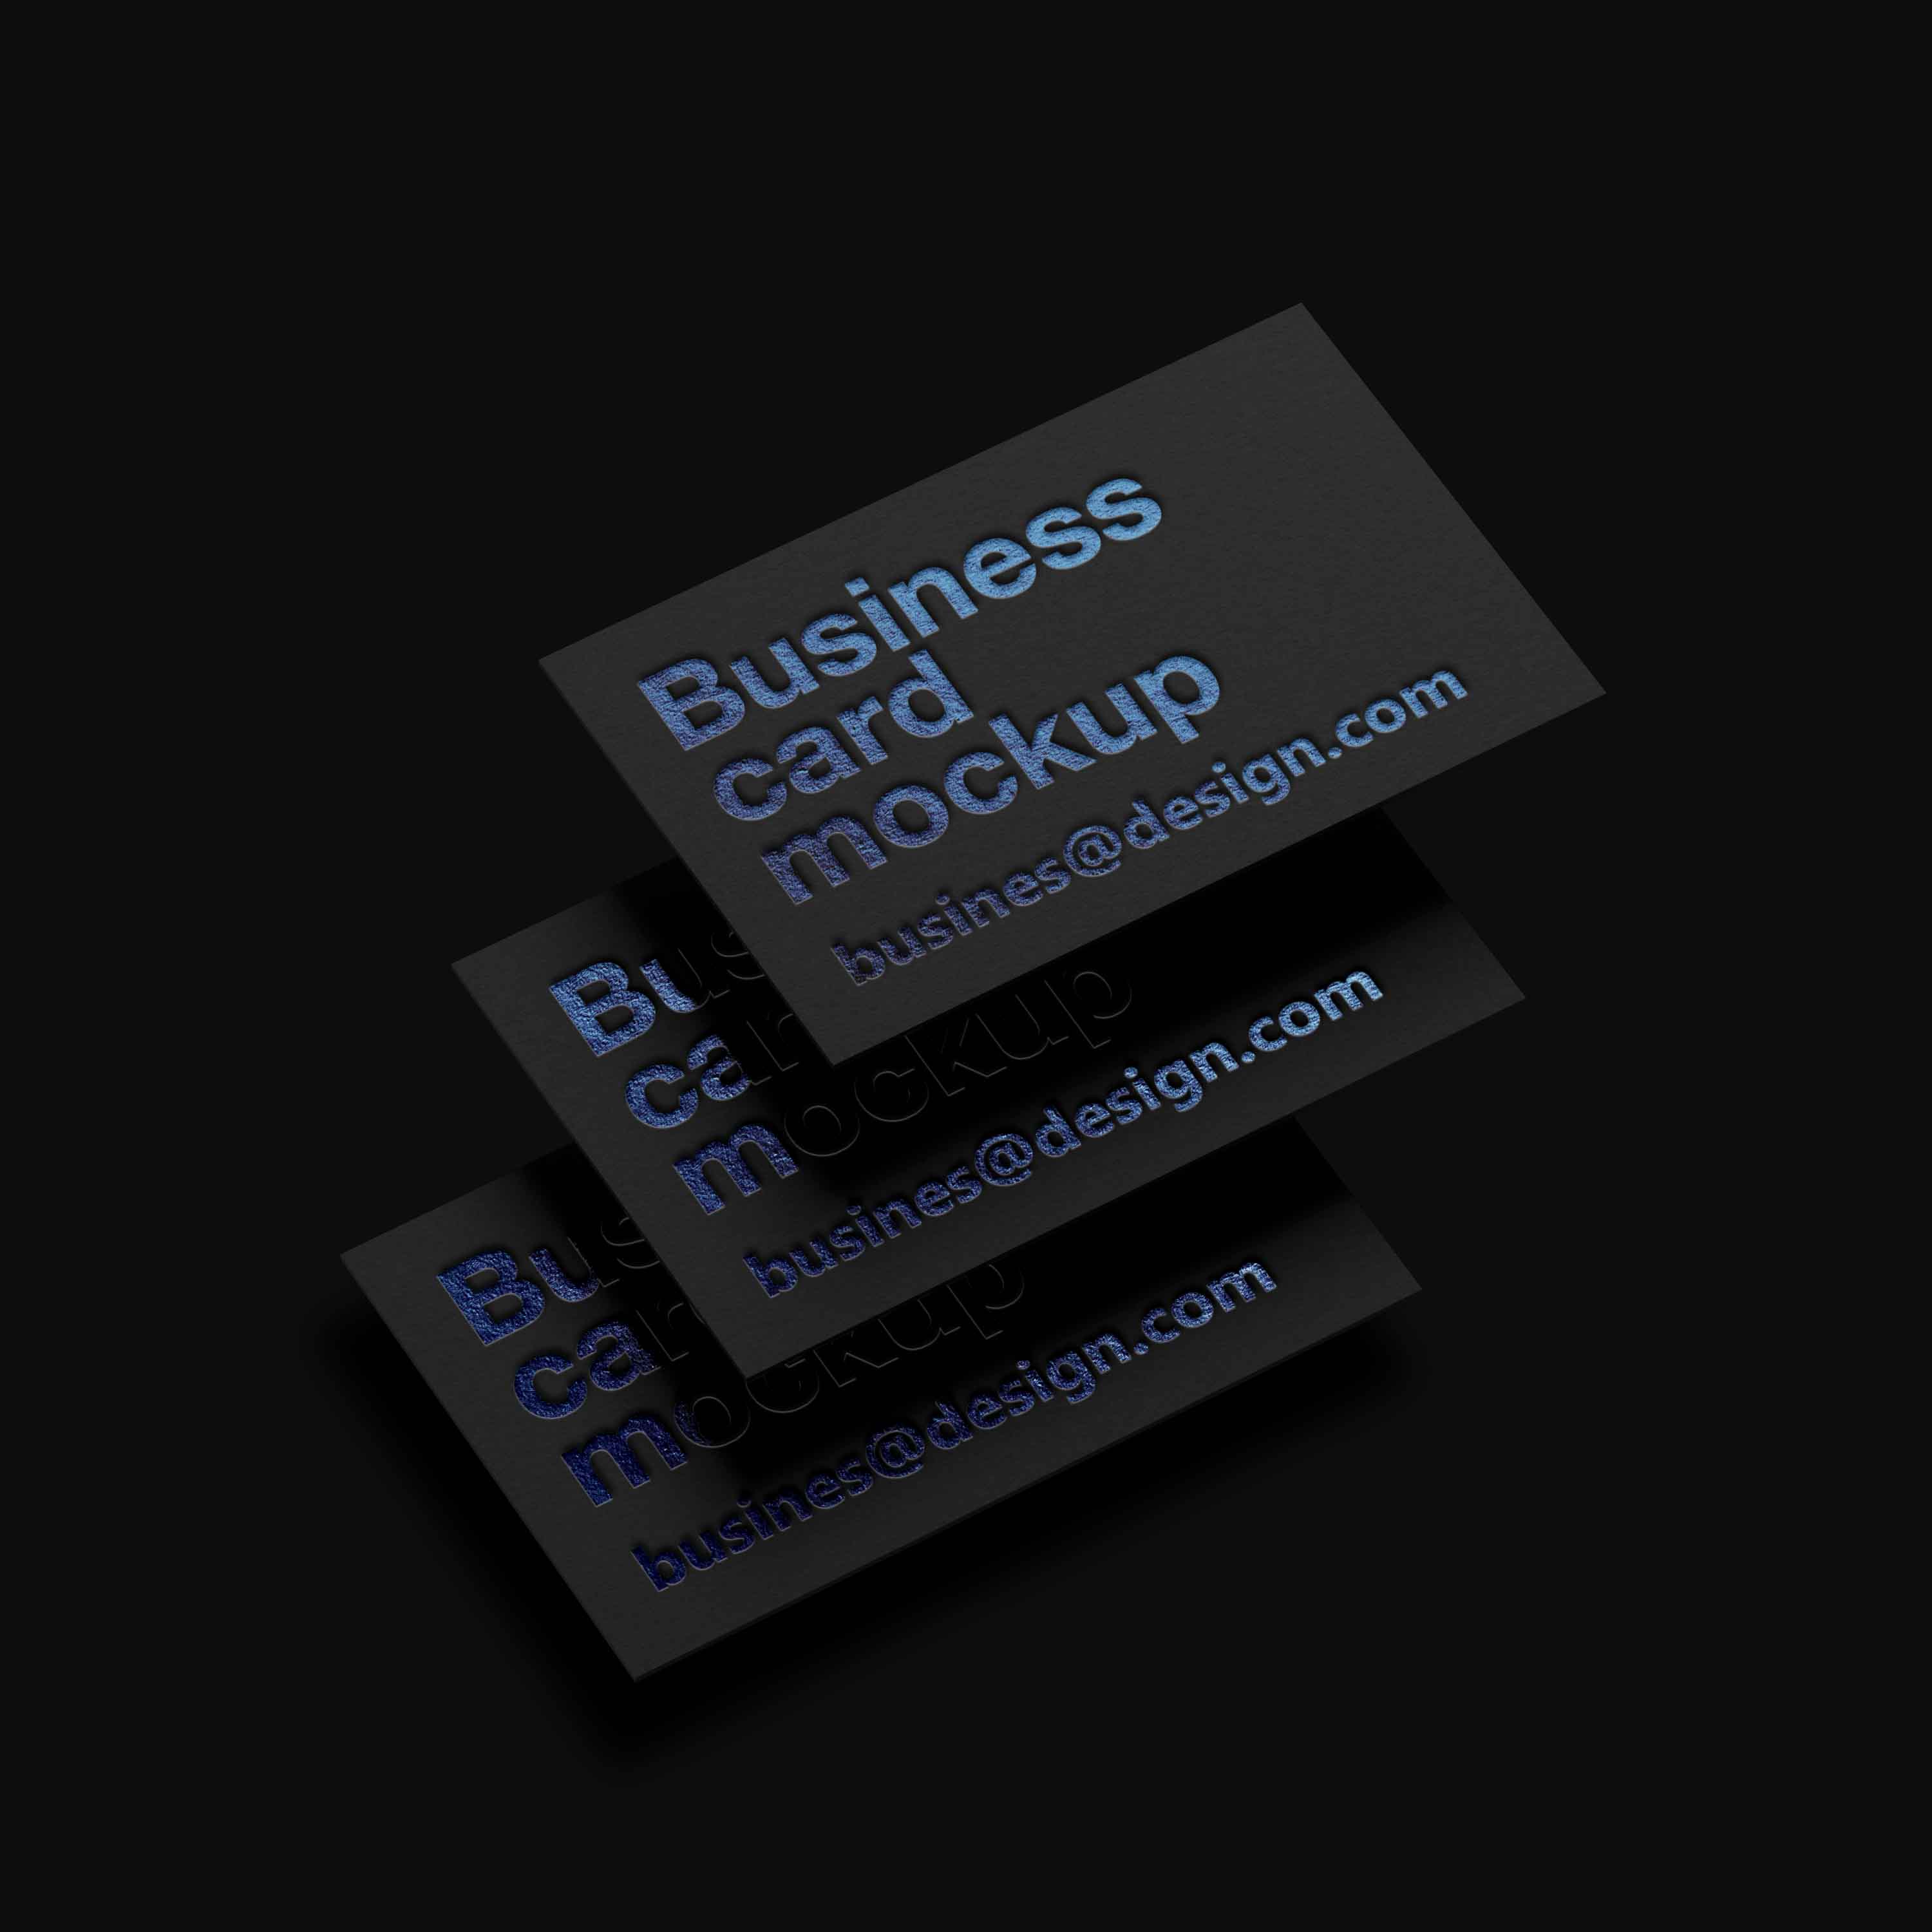 business card mockup 4 low 947